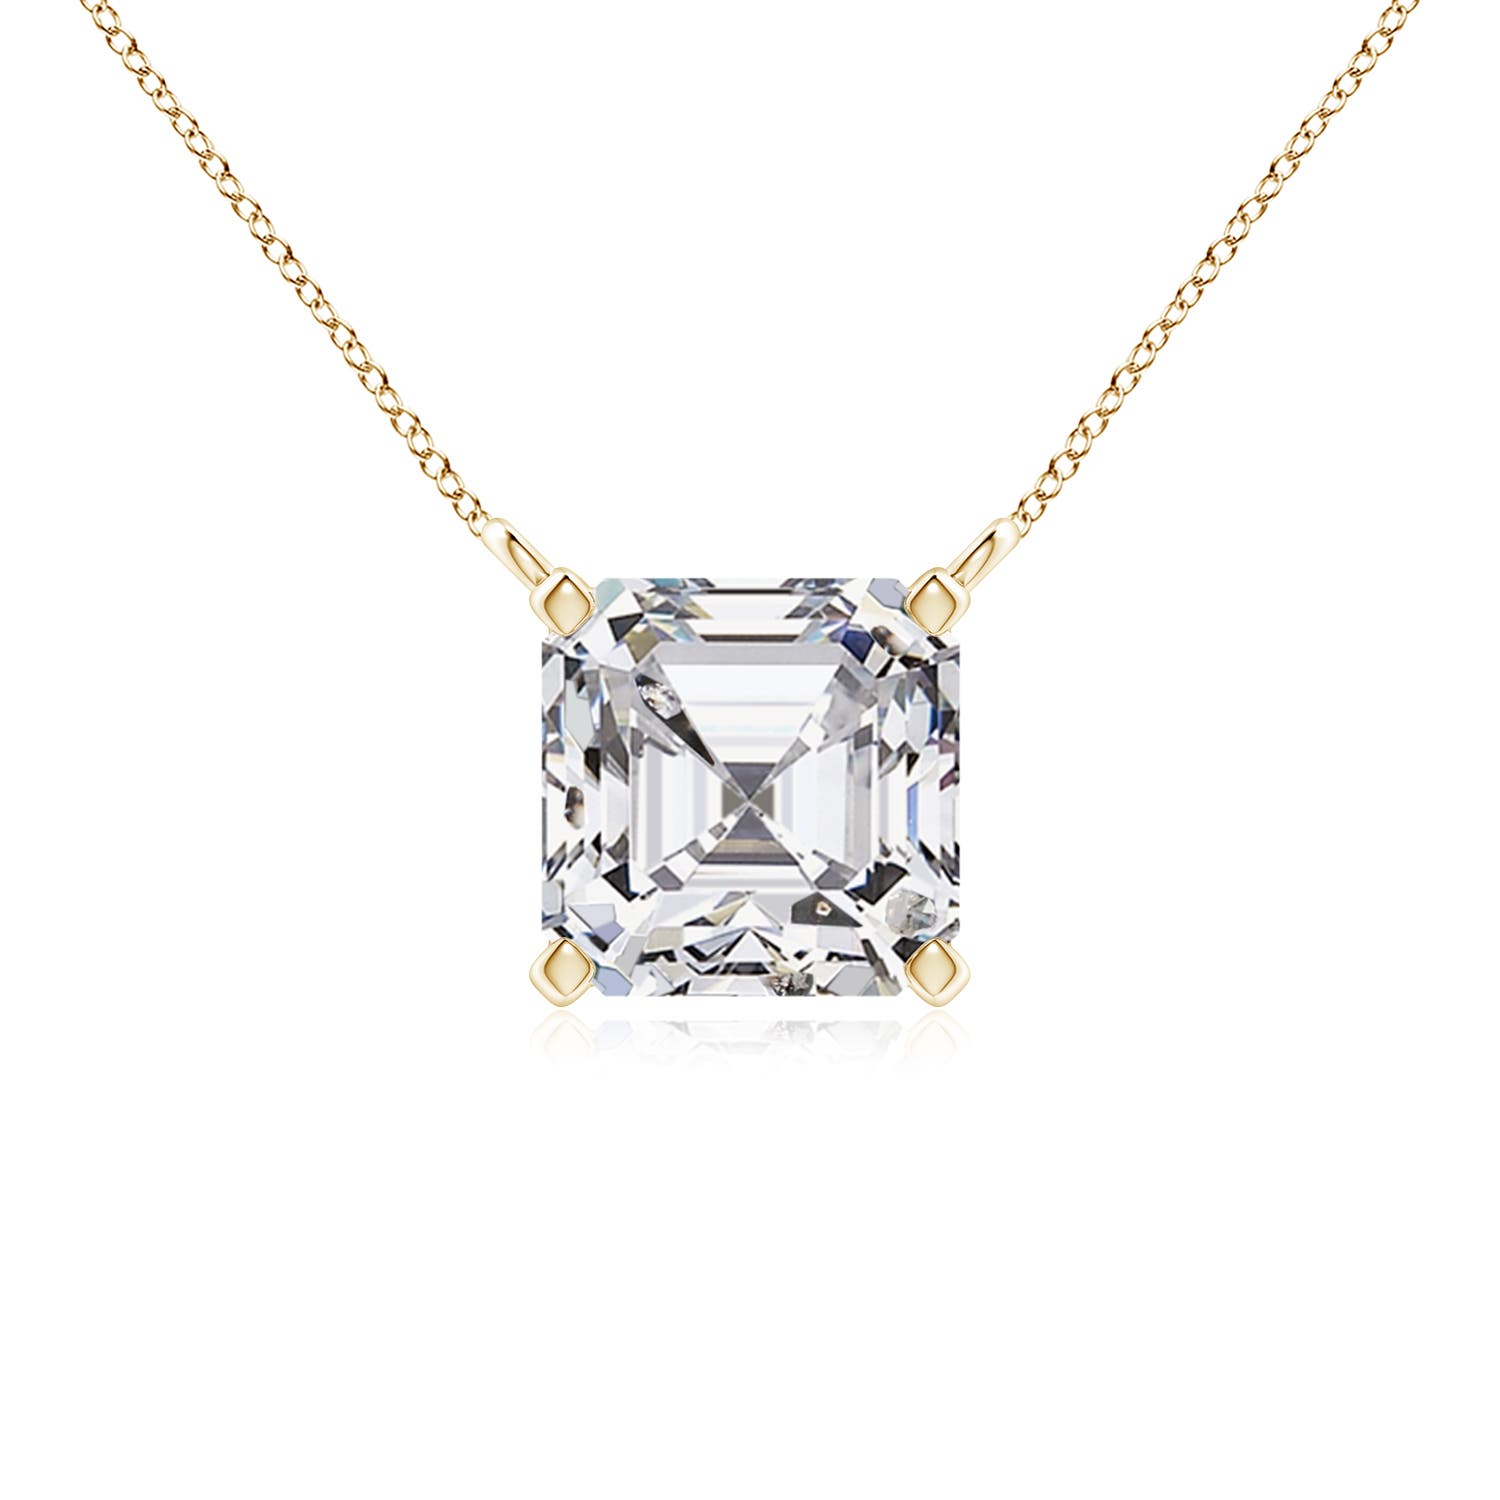 H, SI2 / 2 CT / 14 KT Yellow Gold